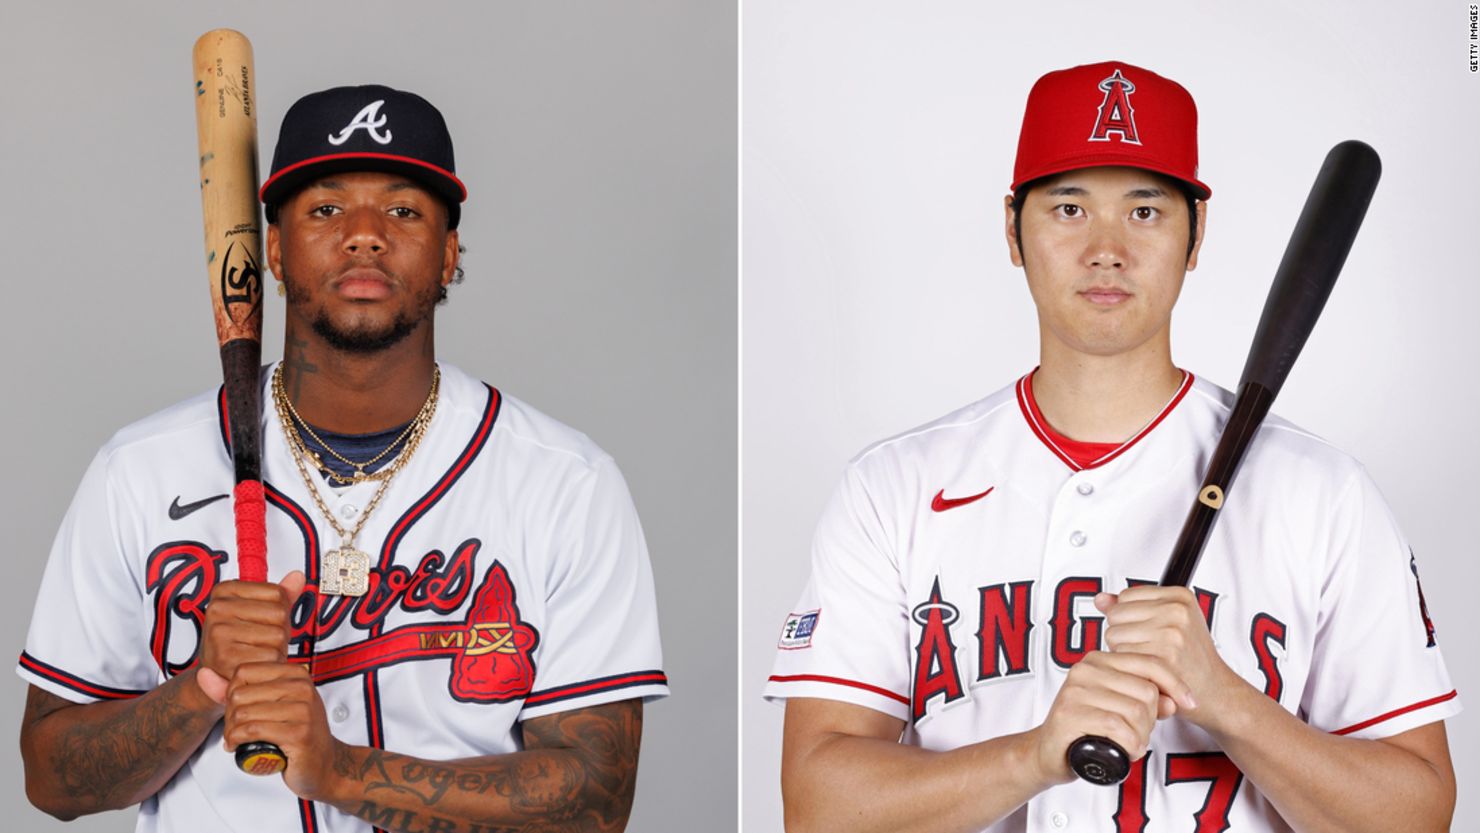 Ronald Acuña Jr. of the Atlanta Braves and Shohei Ohtani of the Los Angeles Angels.